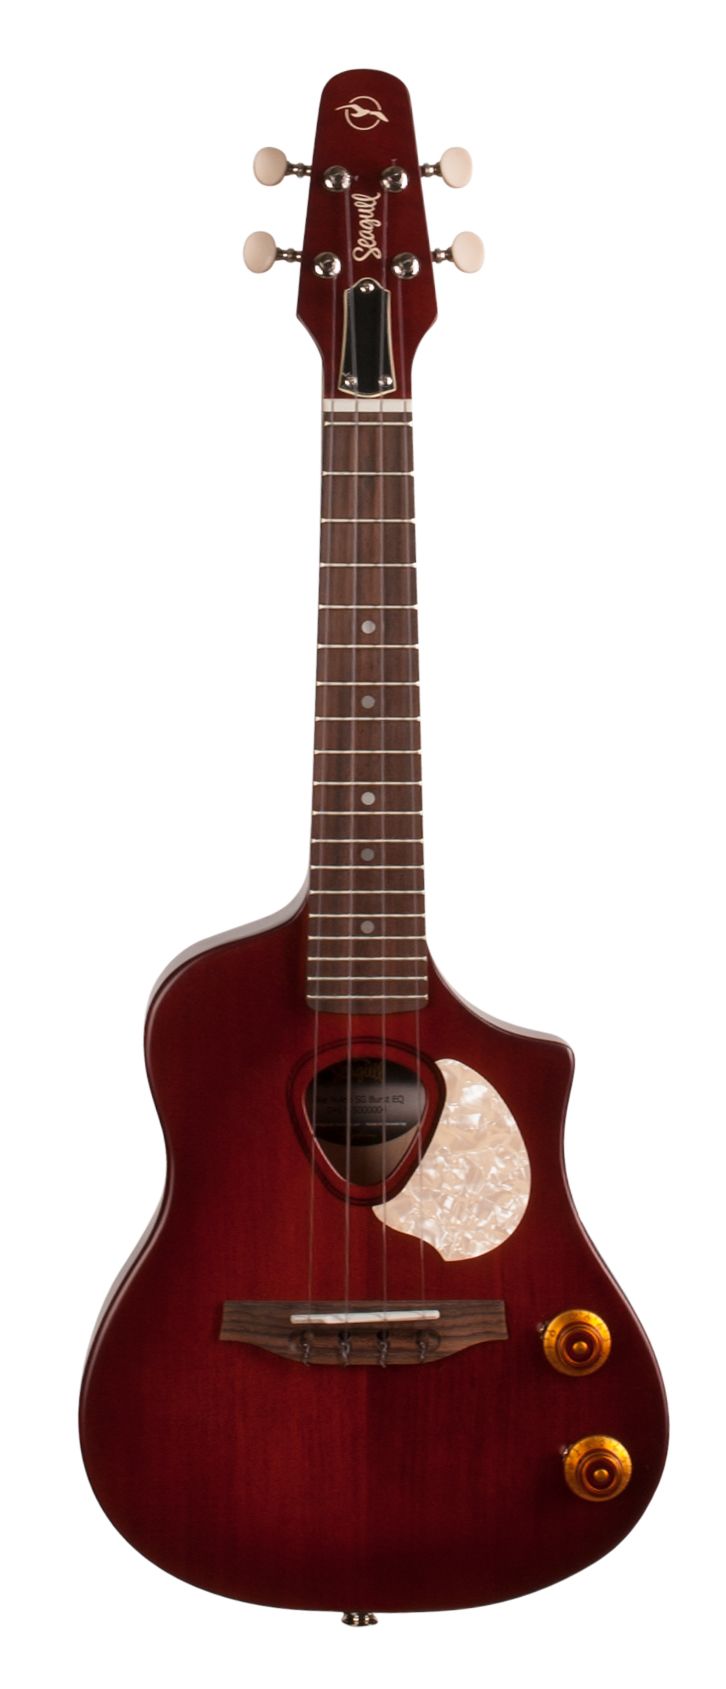 Seagull 046355 Acoustic Electric Ukulele Nylon SG Burst EQ with Carrying Bag MADE In CANADA